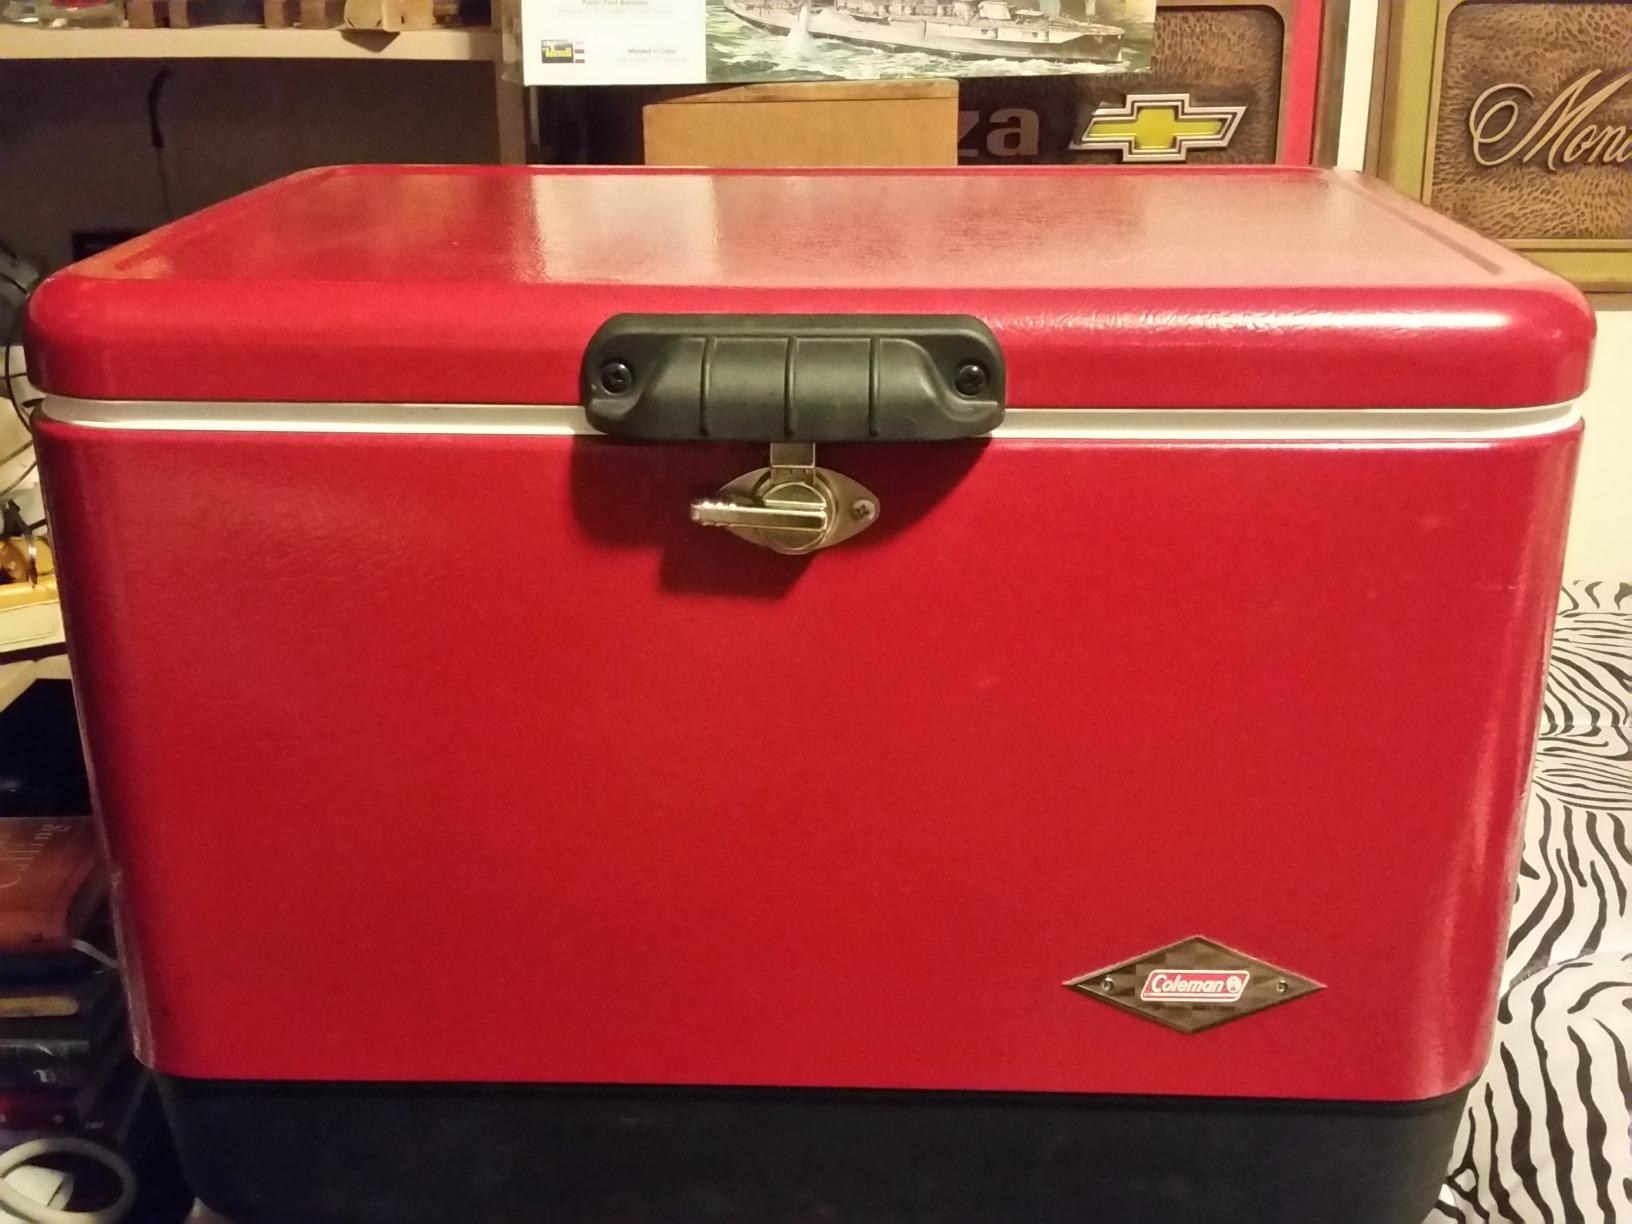 red cooler with metal latch and small Coleman logo on front